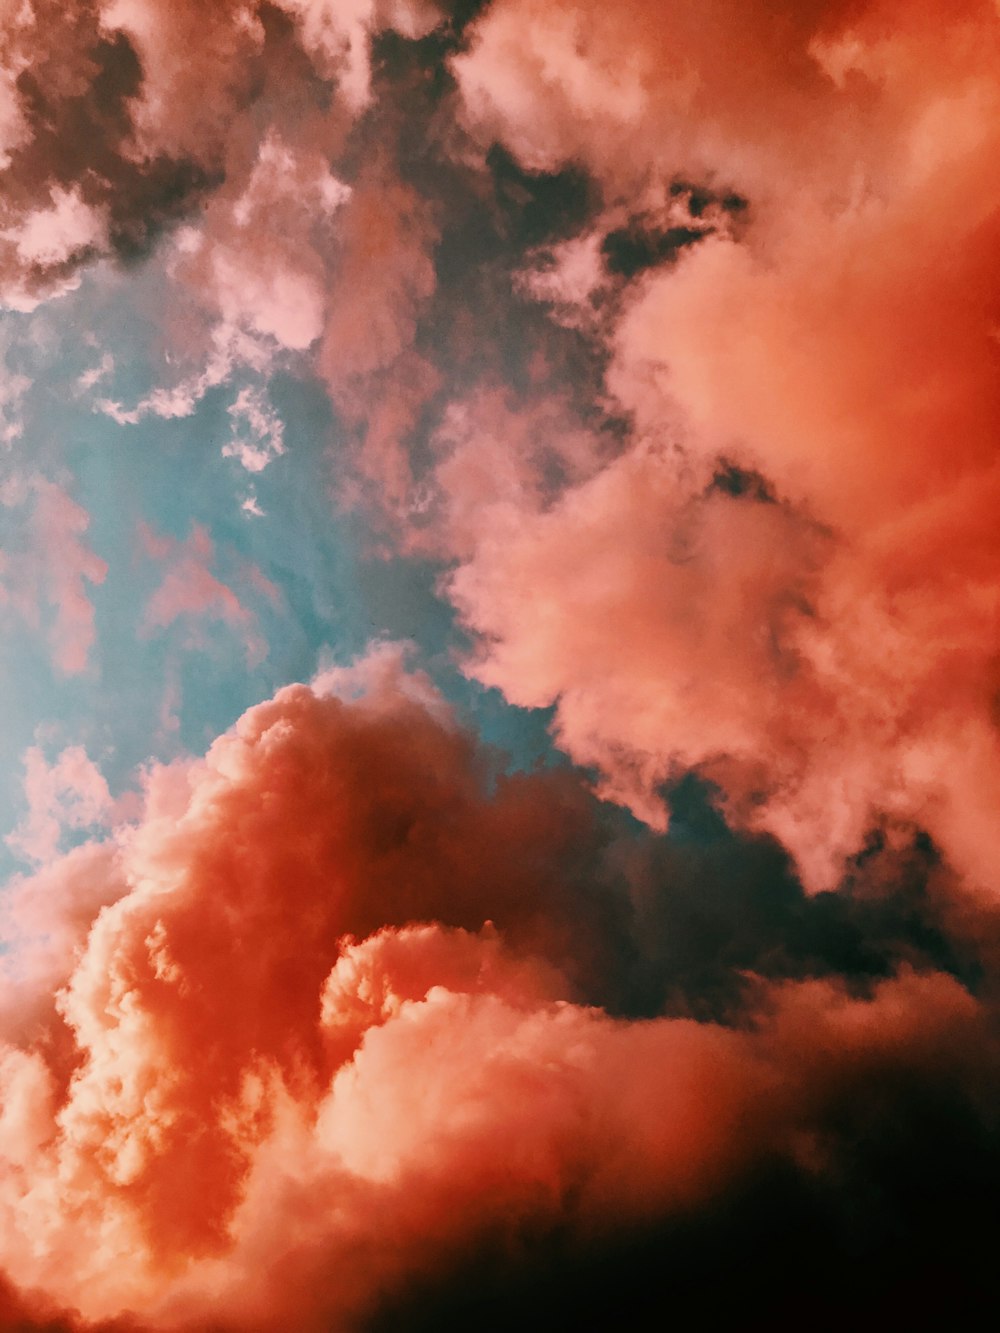 Anime Sky Pictures | Download Free Images on Unsplash